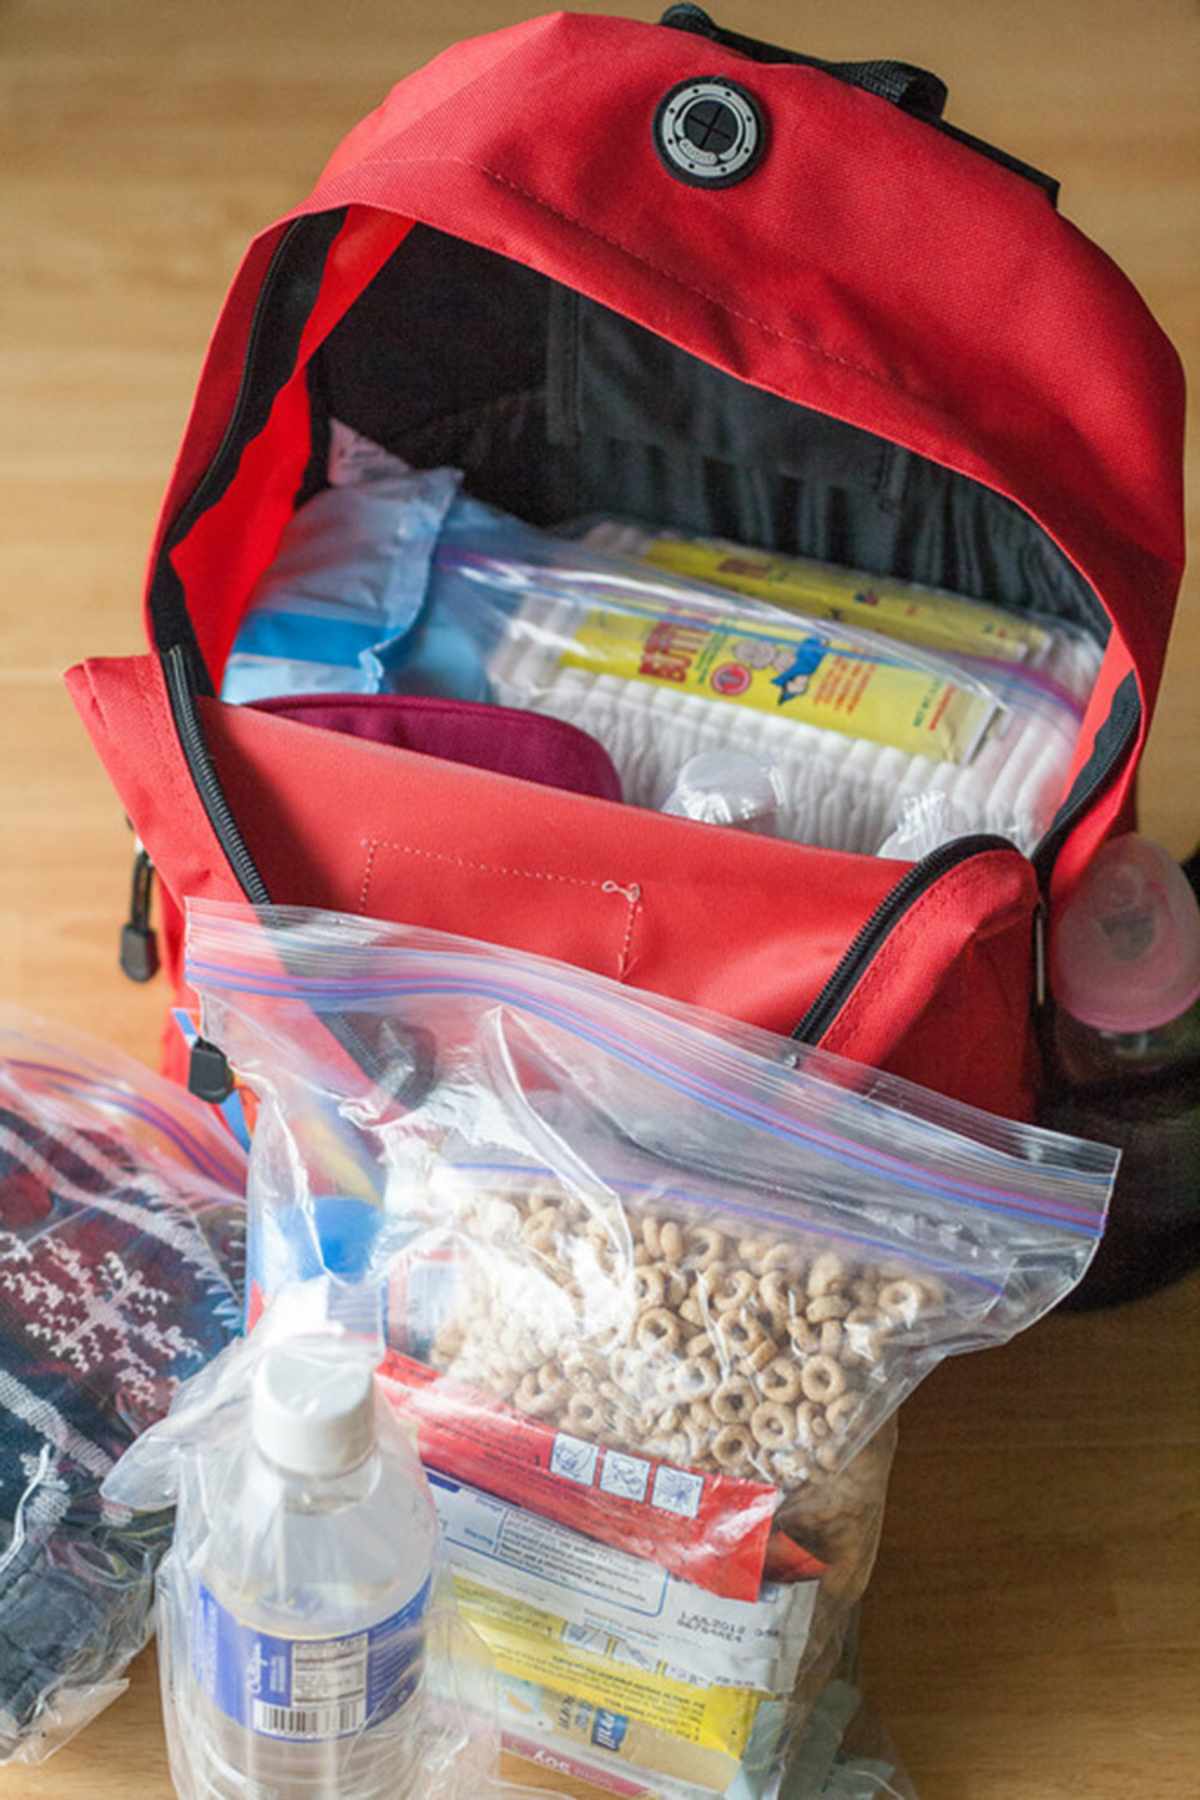 Red backpack open and full of baby supplies including cheerios.